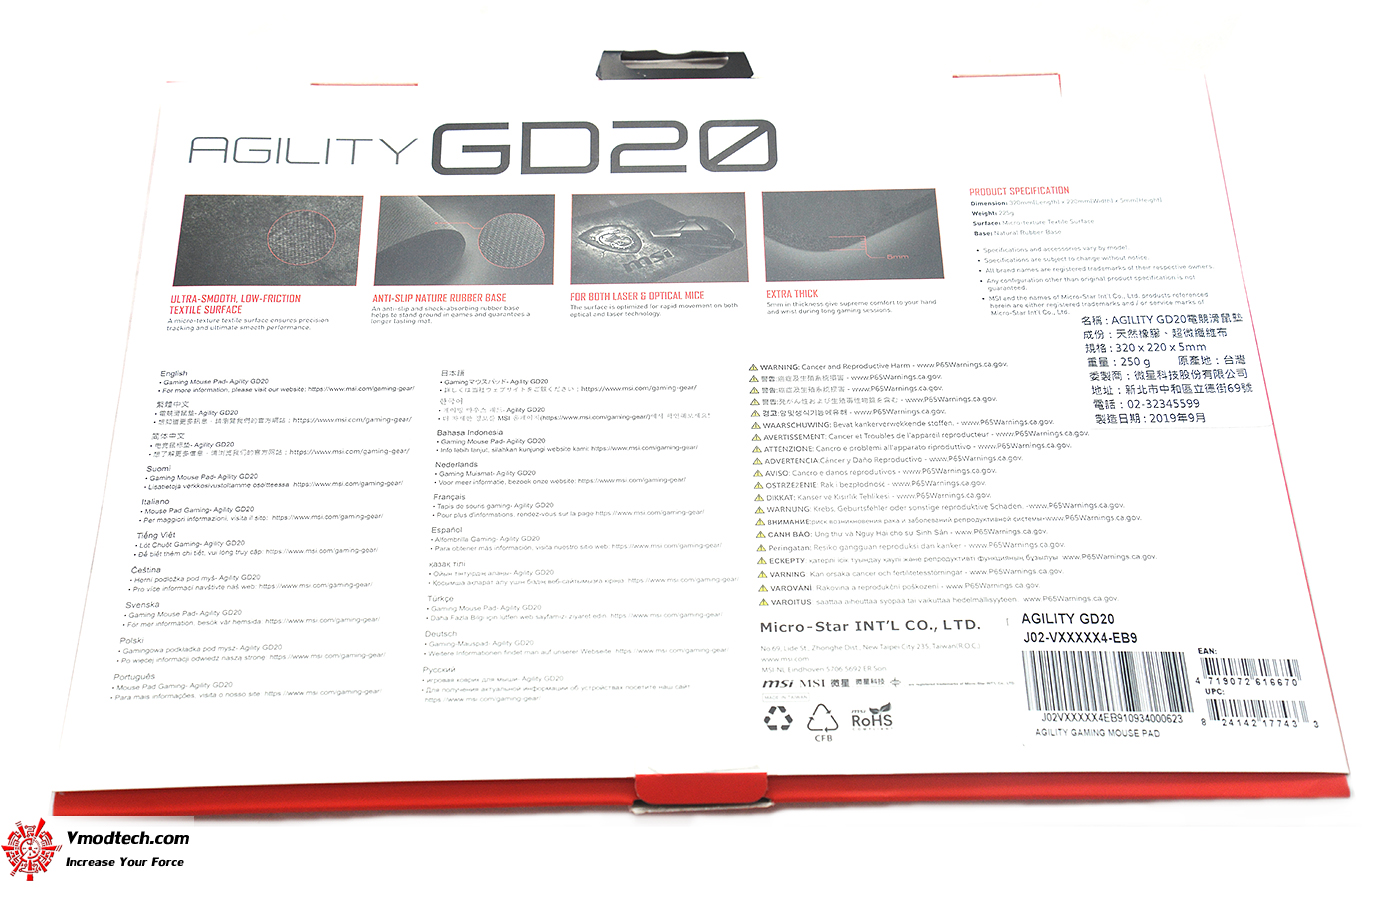 dsc 5029 MSI AGILITY GD20 GAMING MOUSEPAD REVIEW